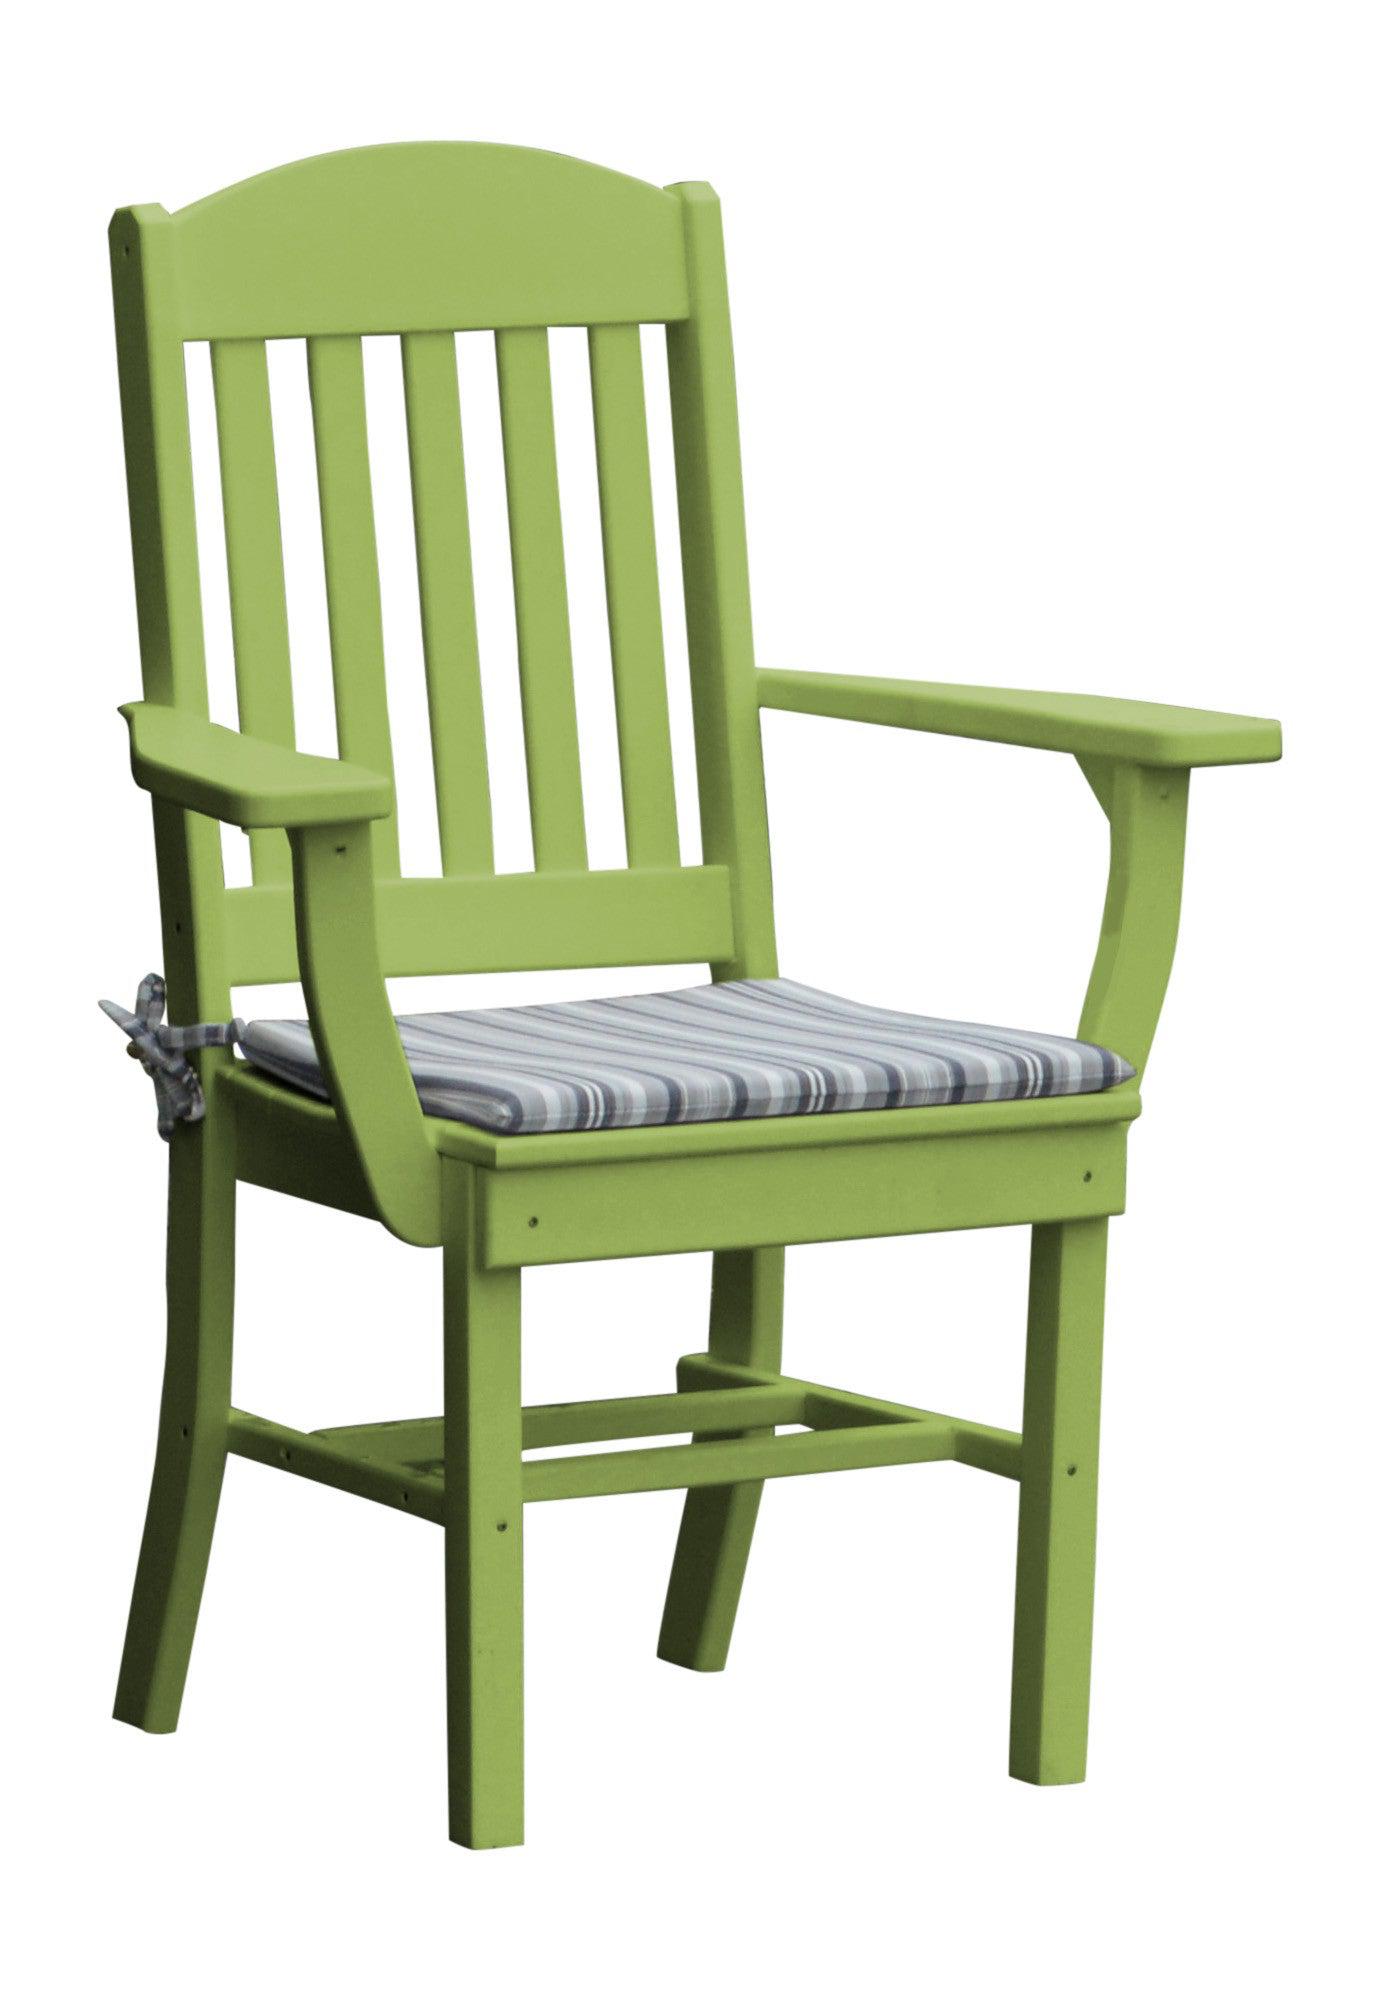 A&L Furniture Company Recycled Plastic Classic Dining Chair w/ Arms - Tropical Lime